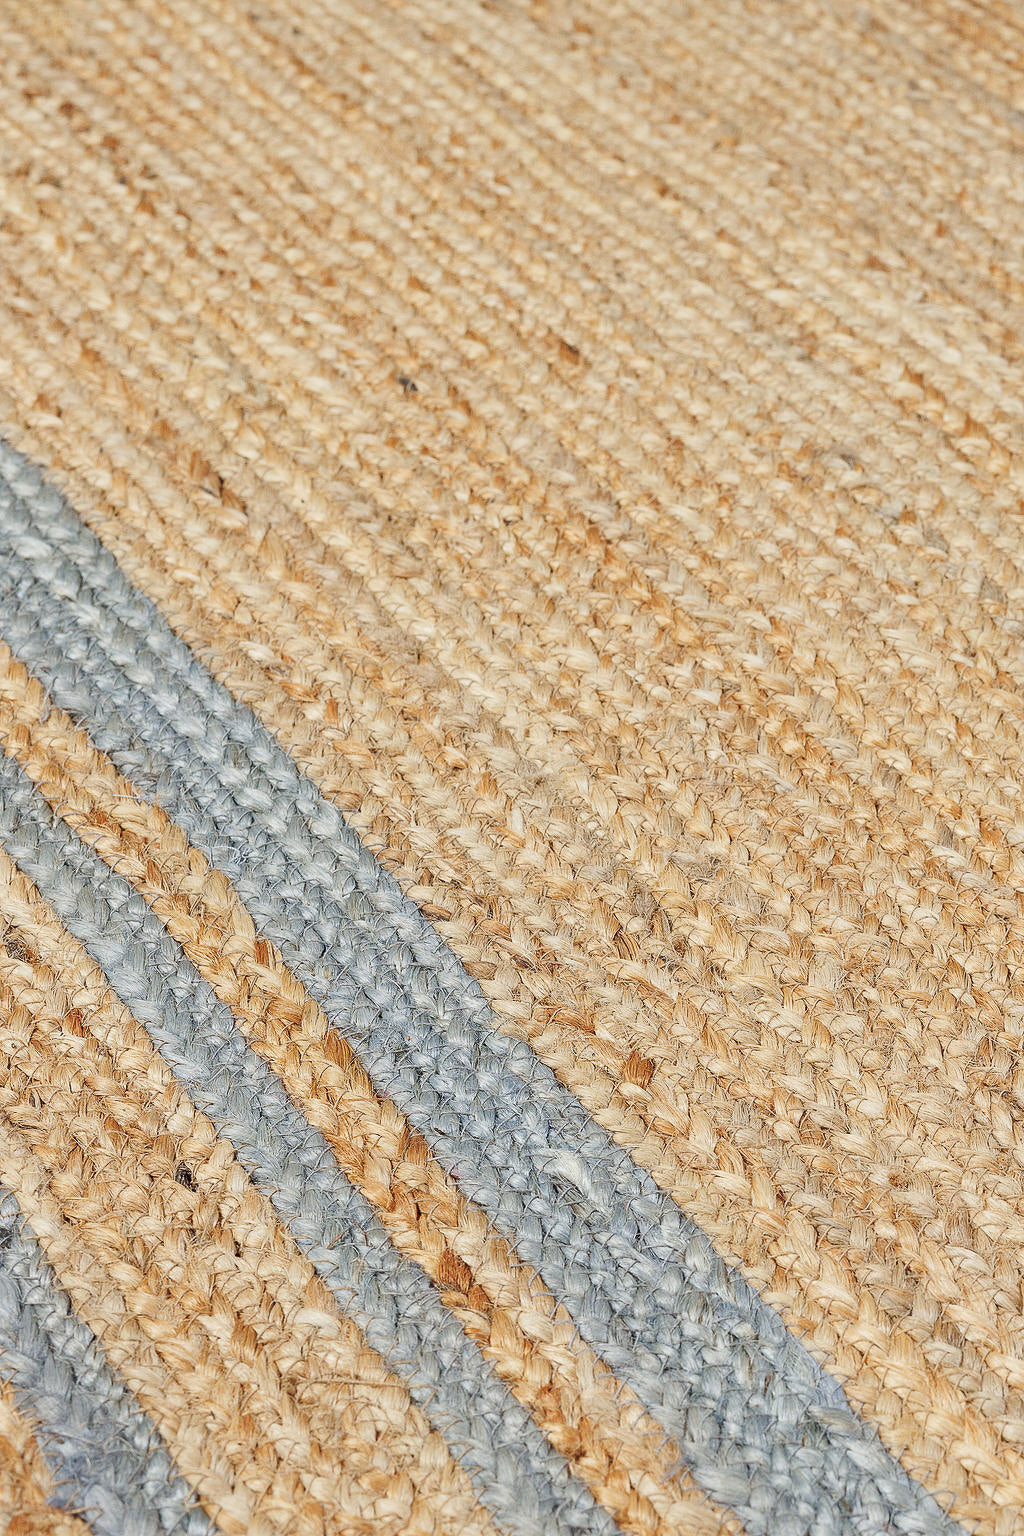 Jute Rug with Blue Border